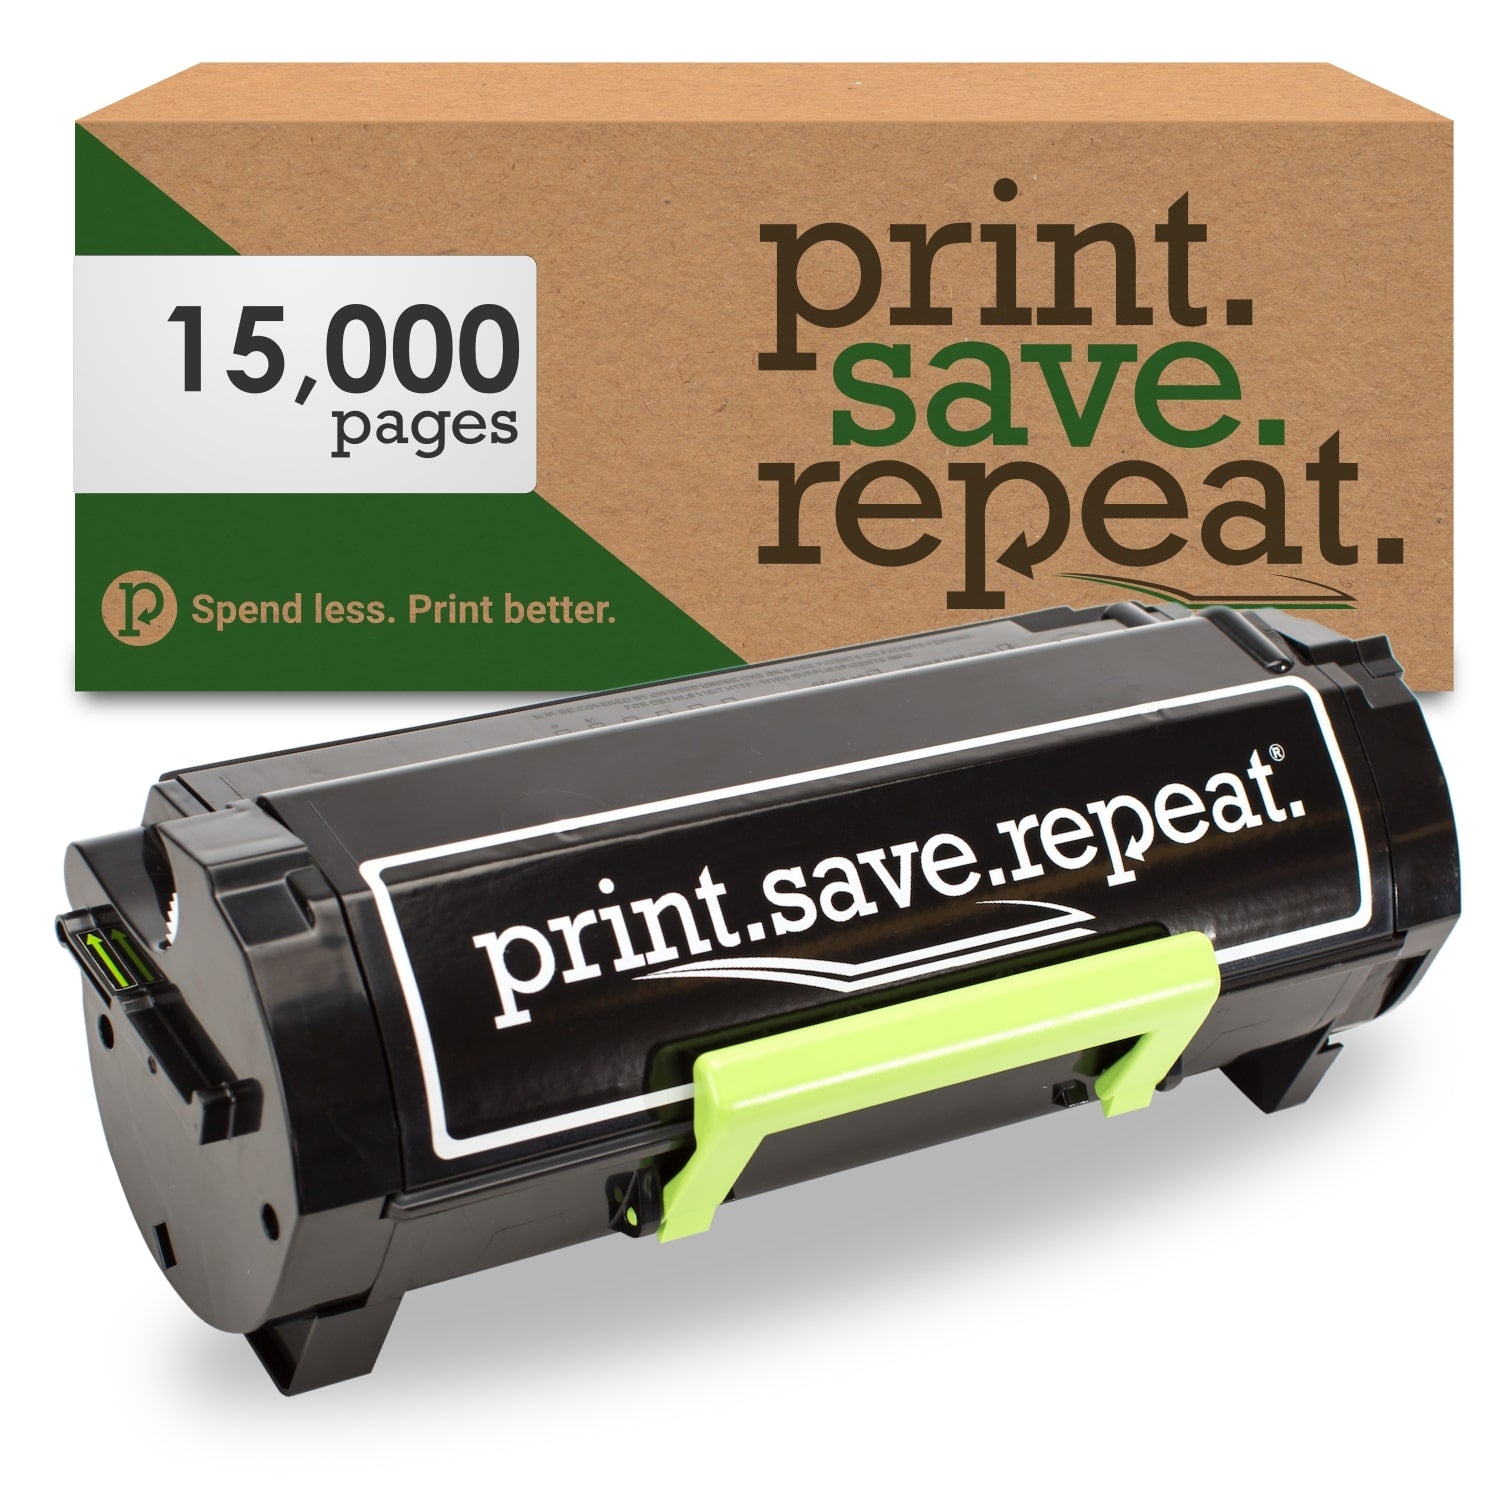 Print.Save.Repeat. Lexmark B260UA0 Ultra High Yield Remanufactured Toner Cartridge for B2650, MB2650 [15,000 Pages]